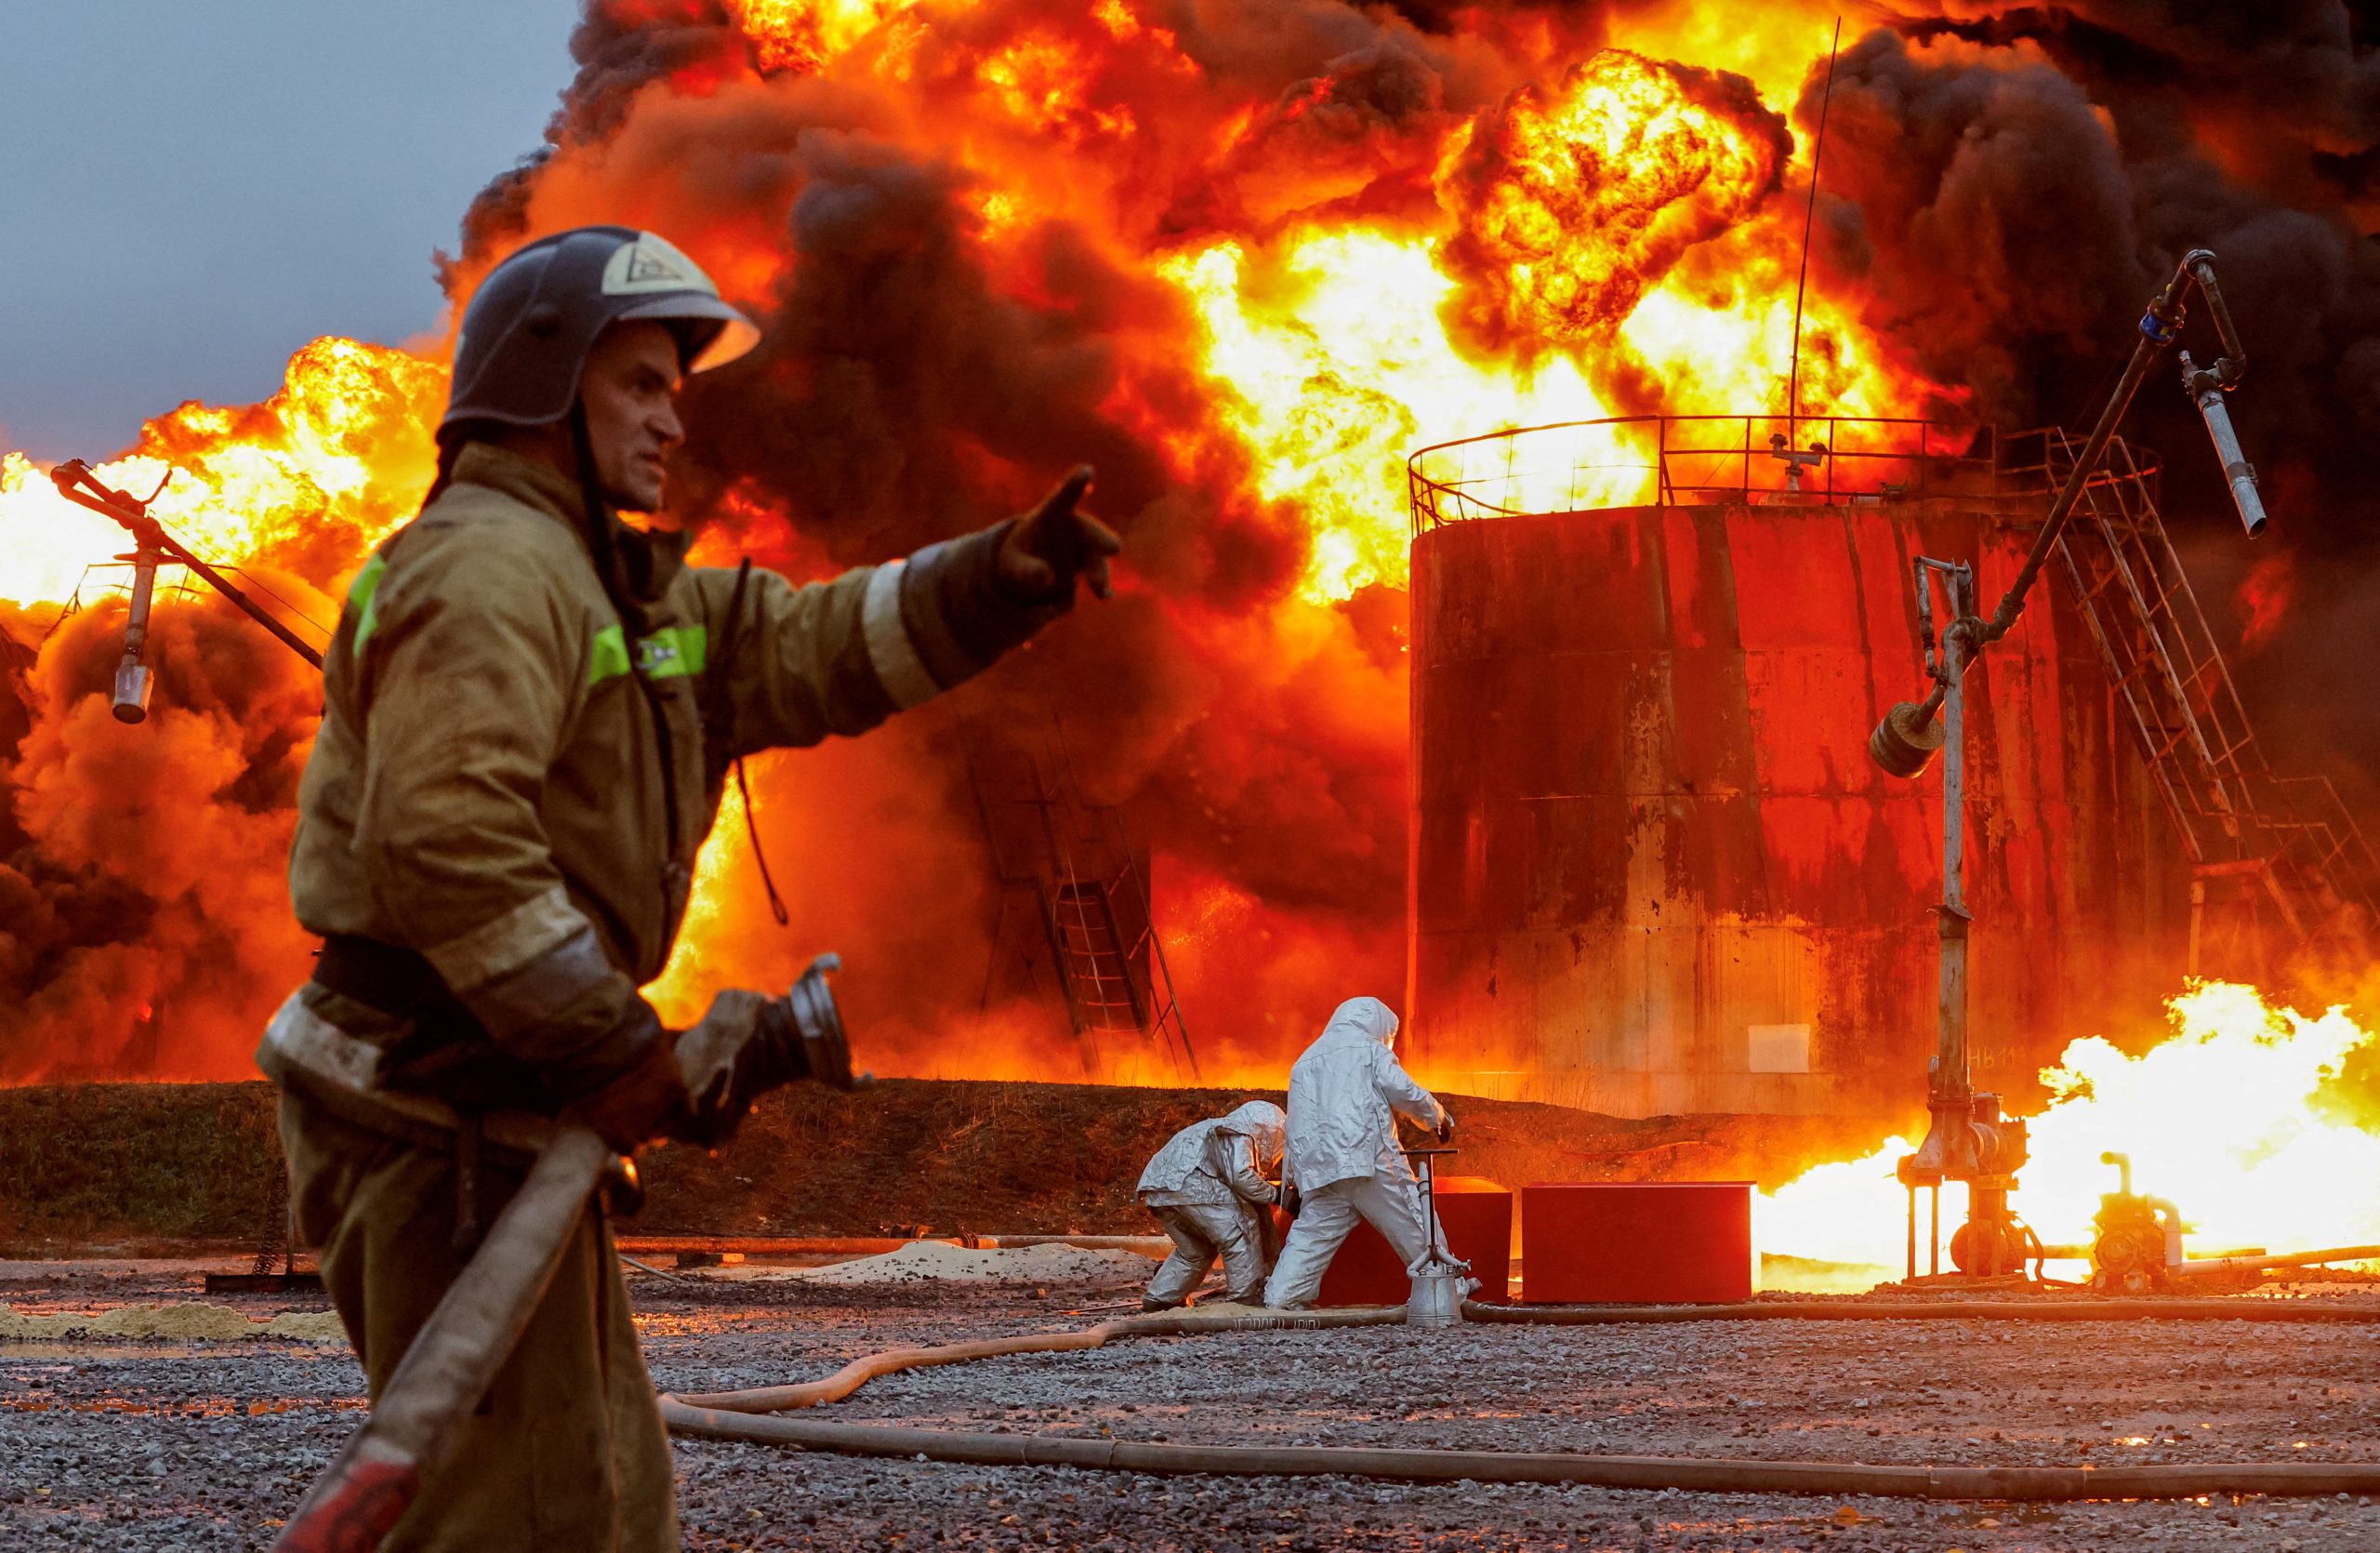 Photo: Firefighters work to extinguish fire following recent shelling at an oil storage in the course of Russia-Ukraine conflict in the town of Shakhtarsk, October 27, 2022. Credit: REUTERS/Alexander Ermochenko